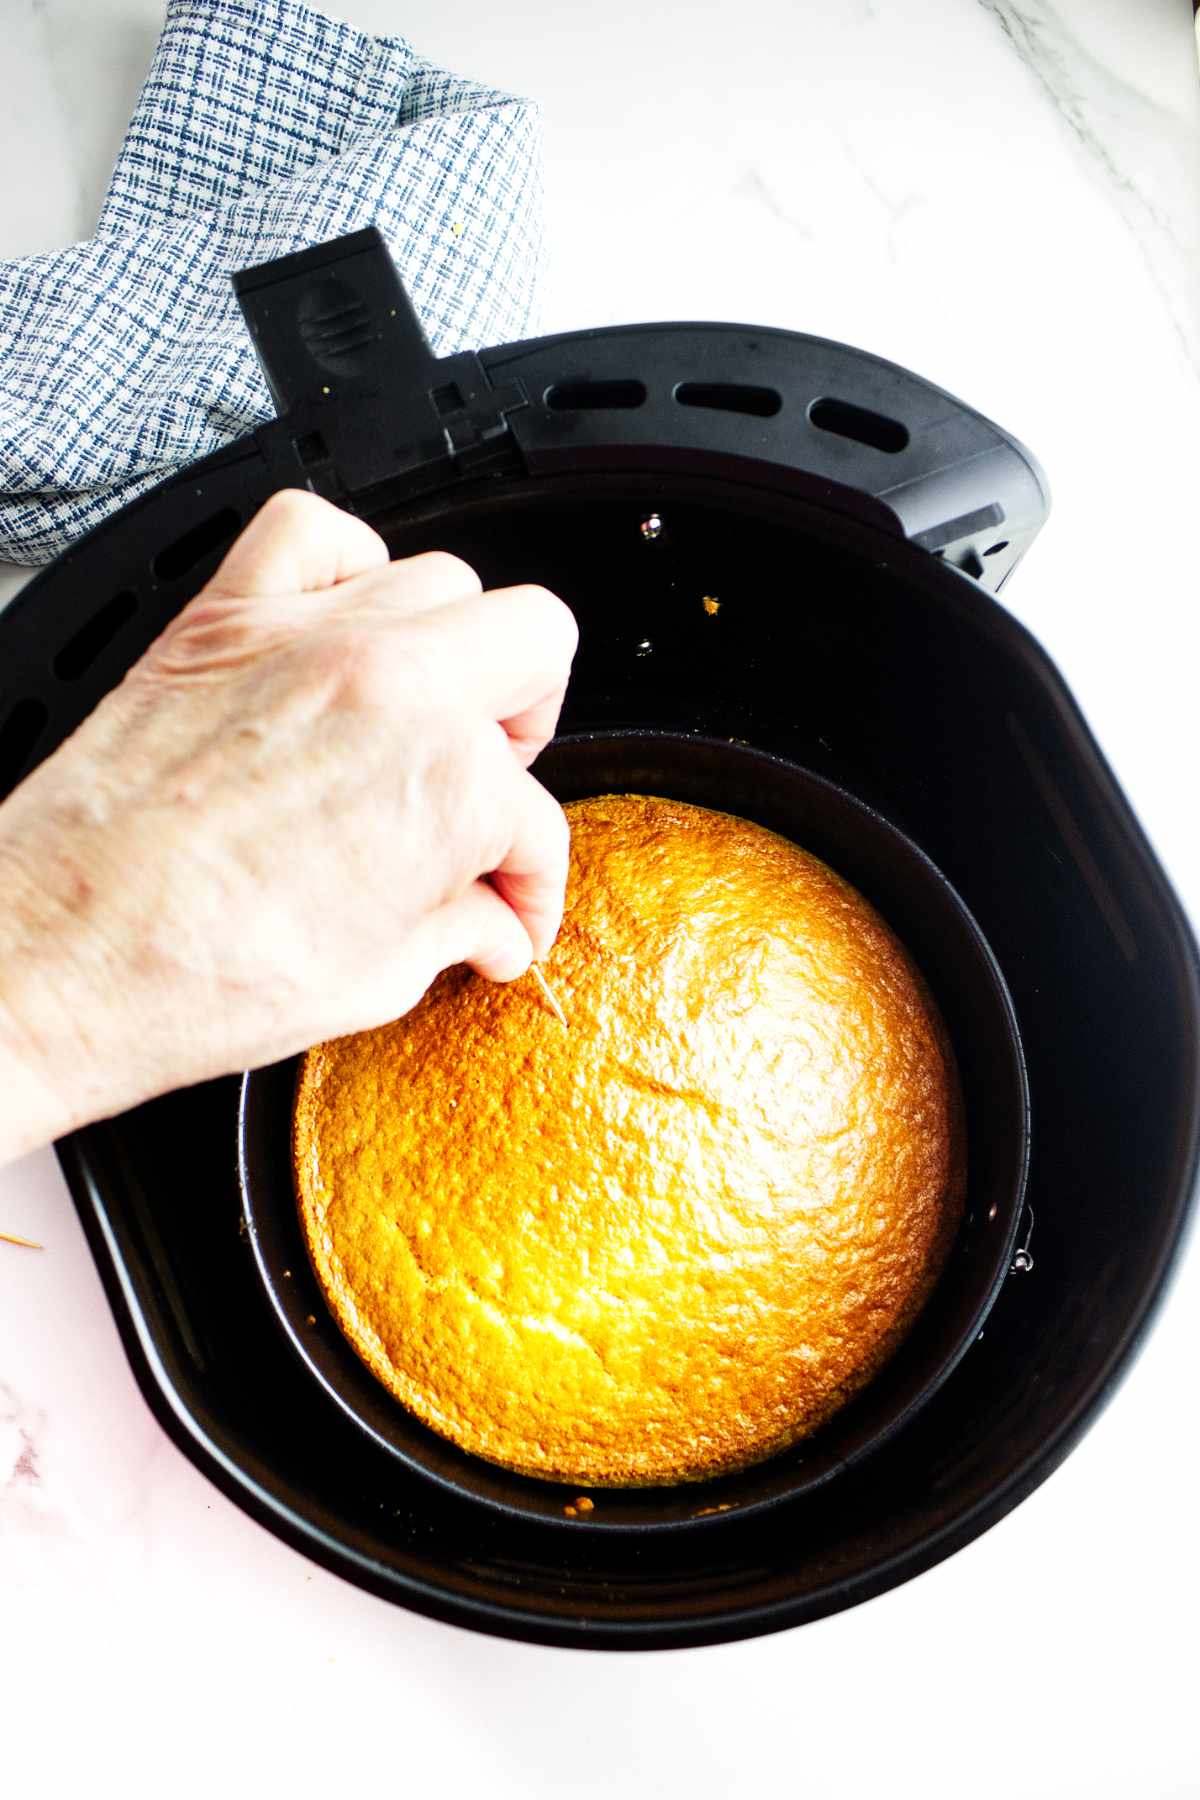 toothpick testing doneness of baked cornbread in air fryer basket.